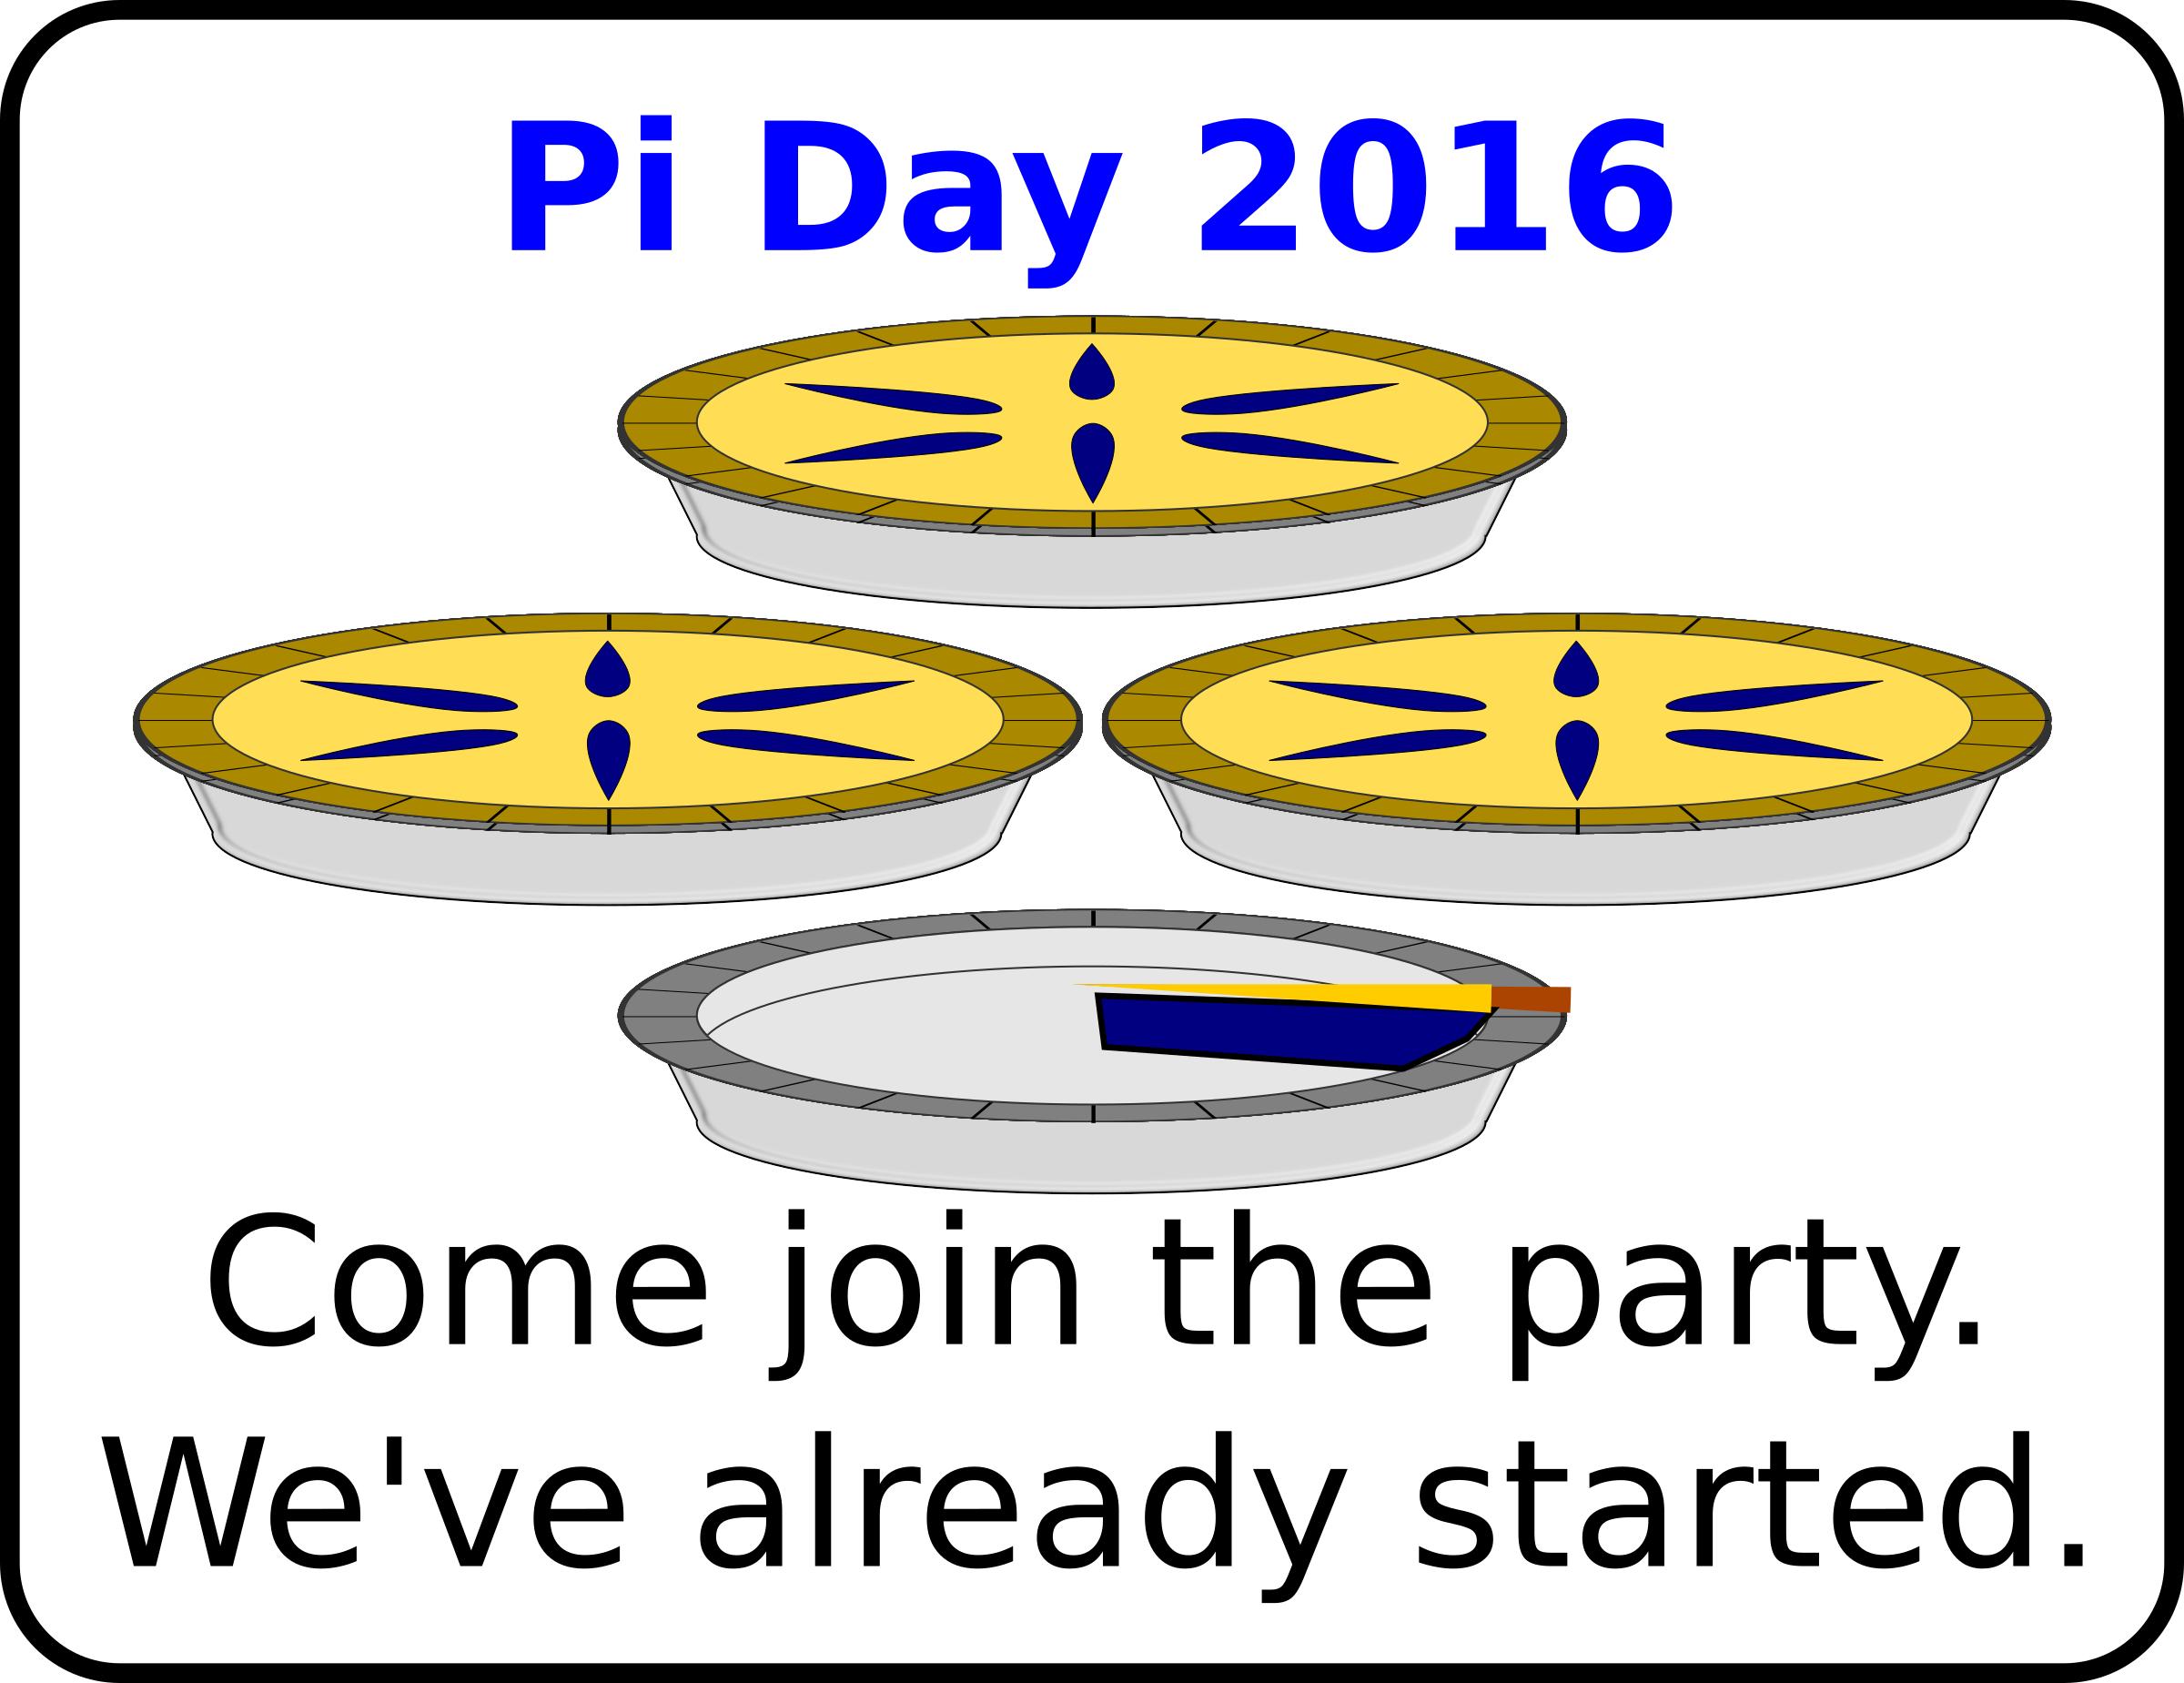 Pi Day 2016 icons